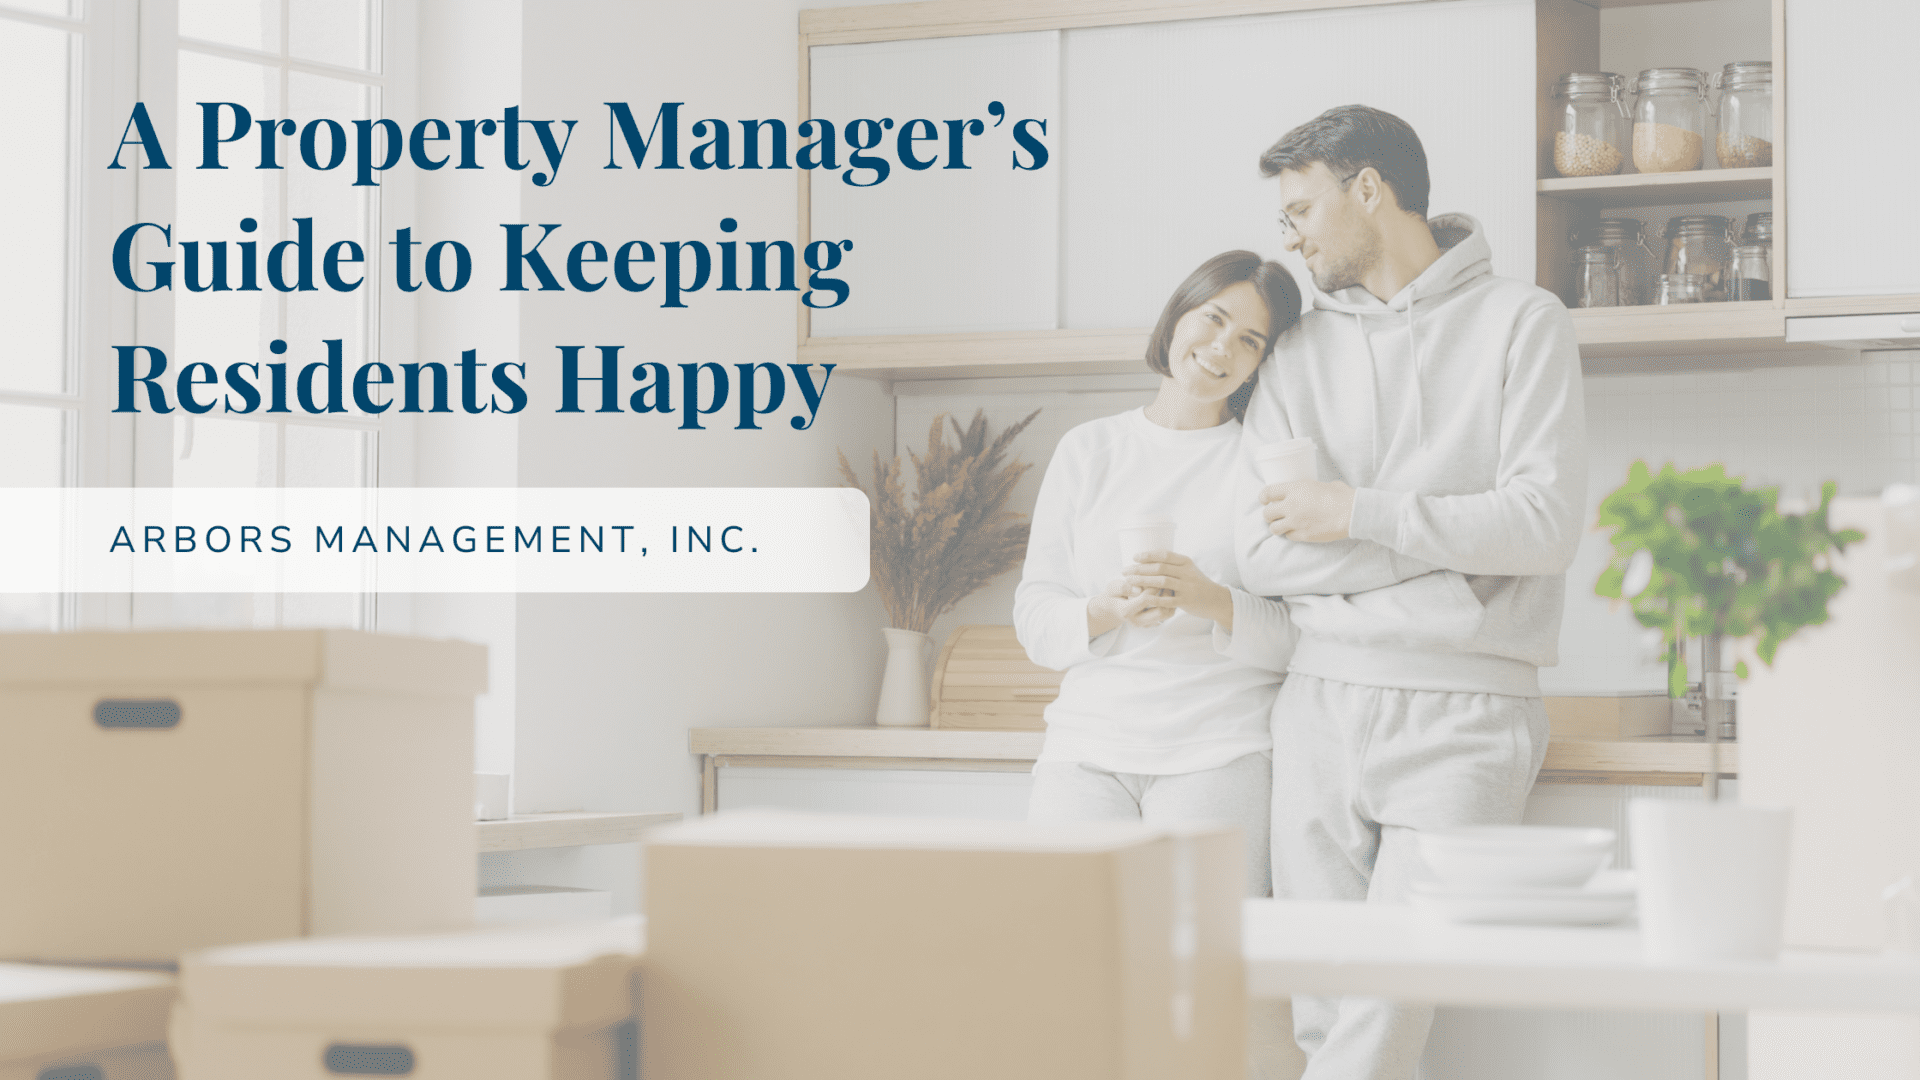 A Property Manager’s Guide to Keeping Residents Happy